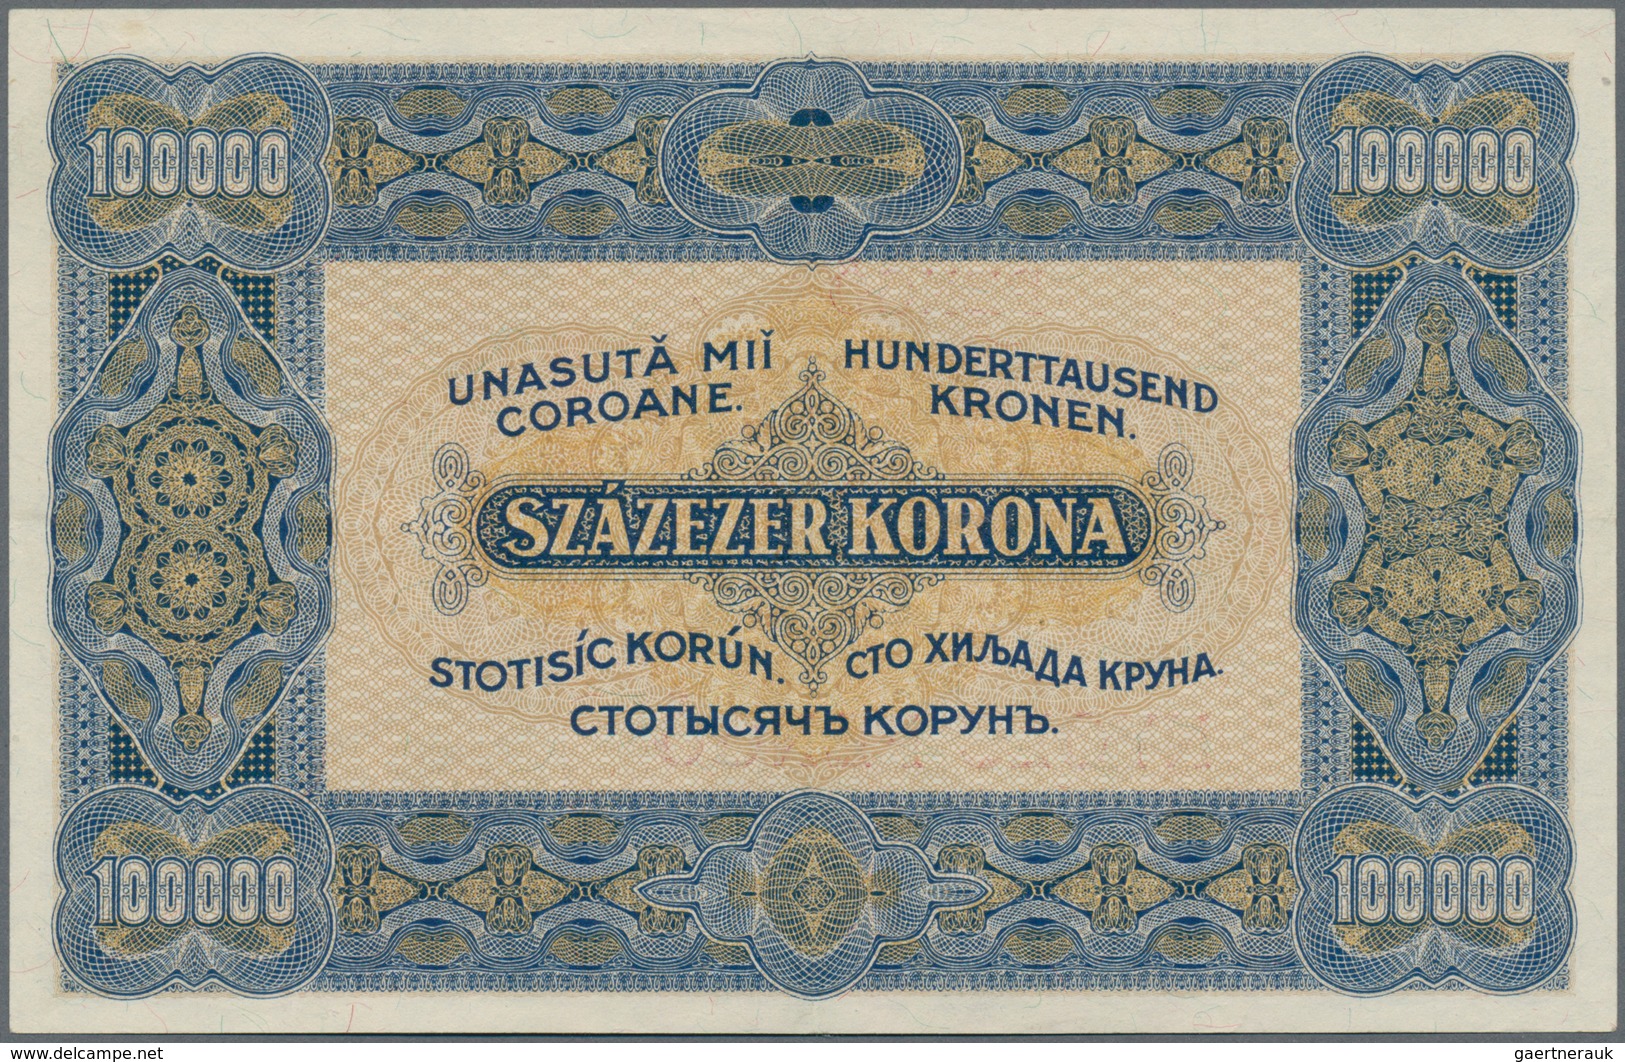 Hungary / Ungarn: Ministry Of Finance 8 Pengö Overprint On 100.000 Korona ND(1925), P.86a, Excellent - Hongrie